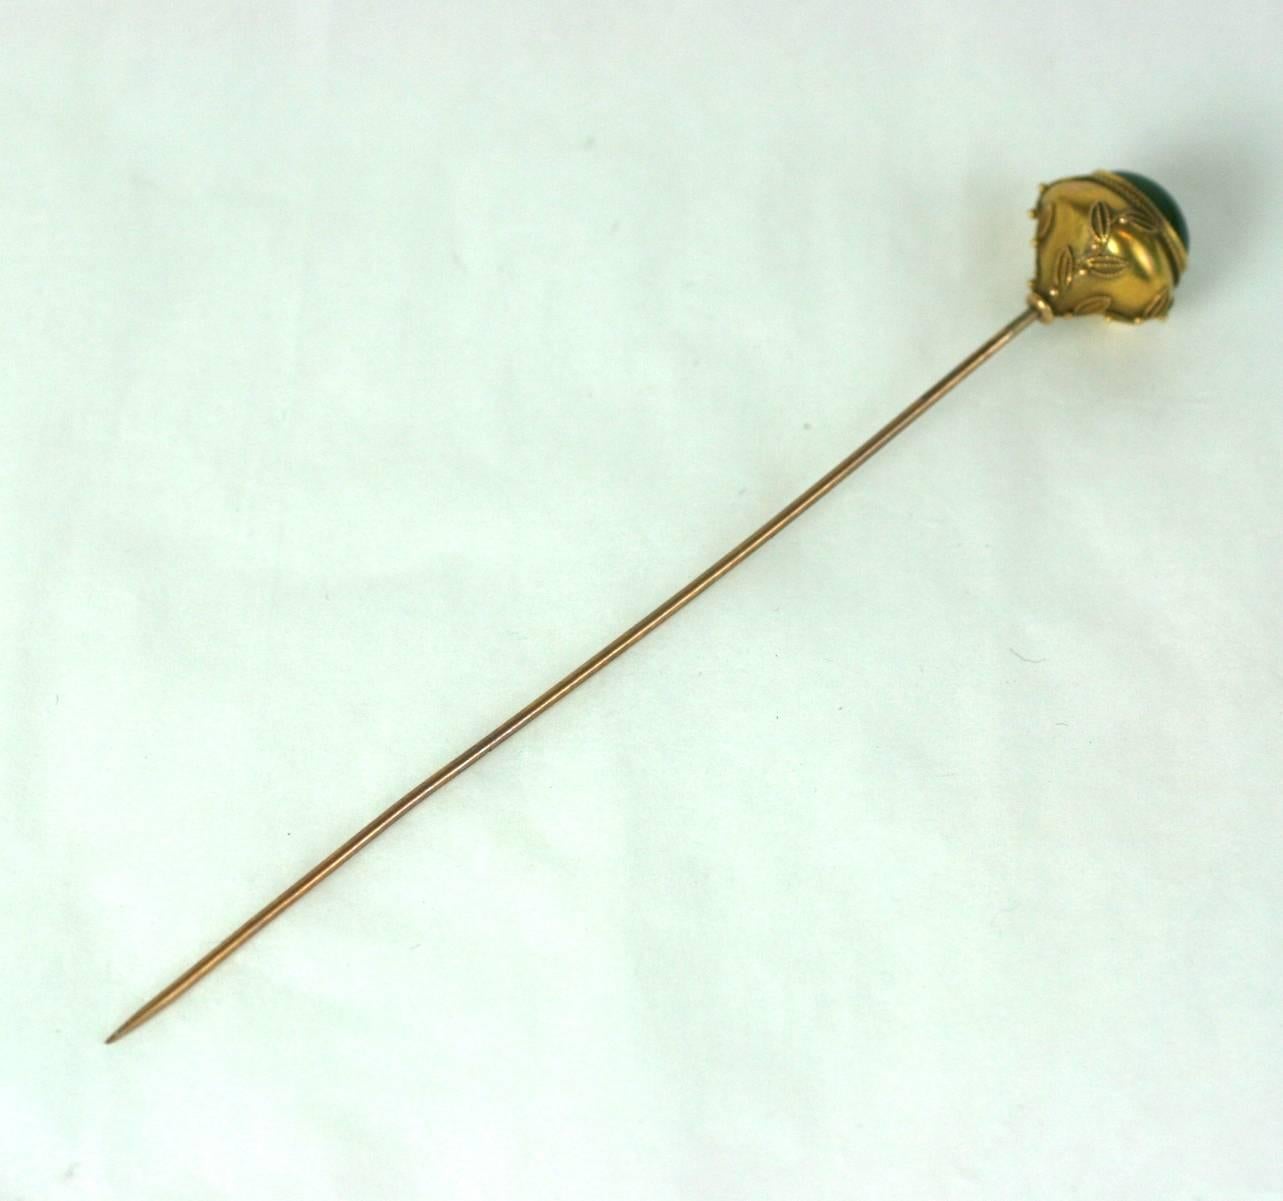 Victorian hat pin in the Aesthetic taste in 14 kt gold with deep green nephrite jade oval cabochon. The sides are decorated with Etruscan gold vine and berry decoration. Shaft is gold filled.  Excellent Condition. 1880's USA. 
L 5